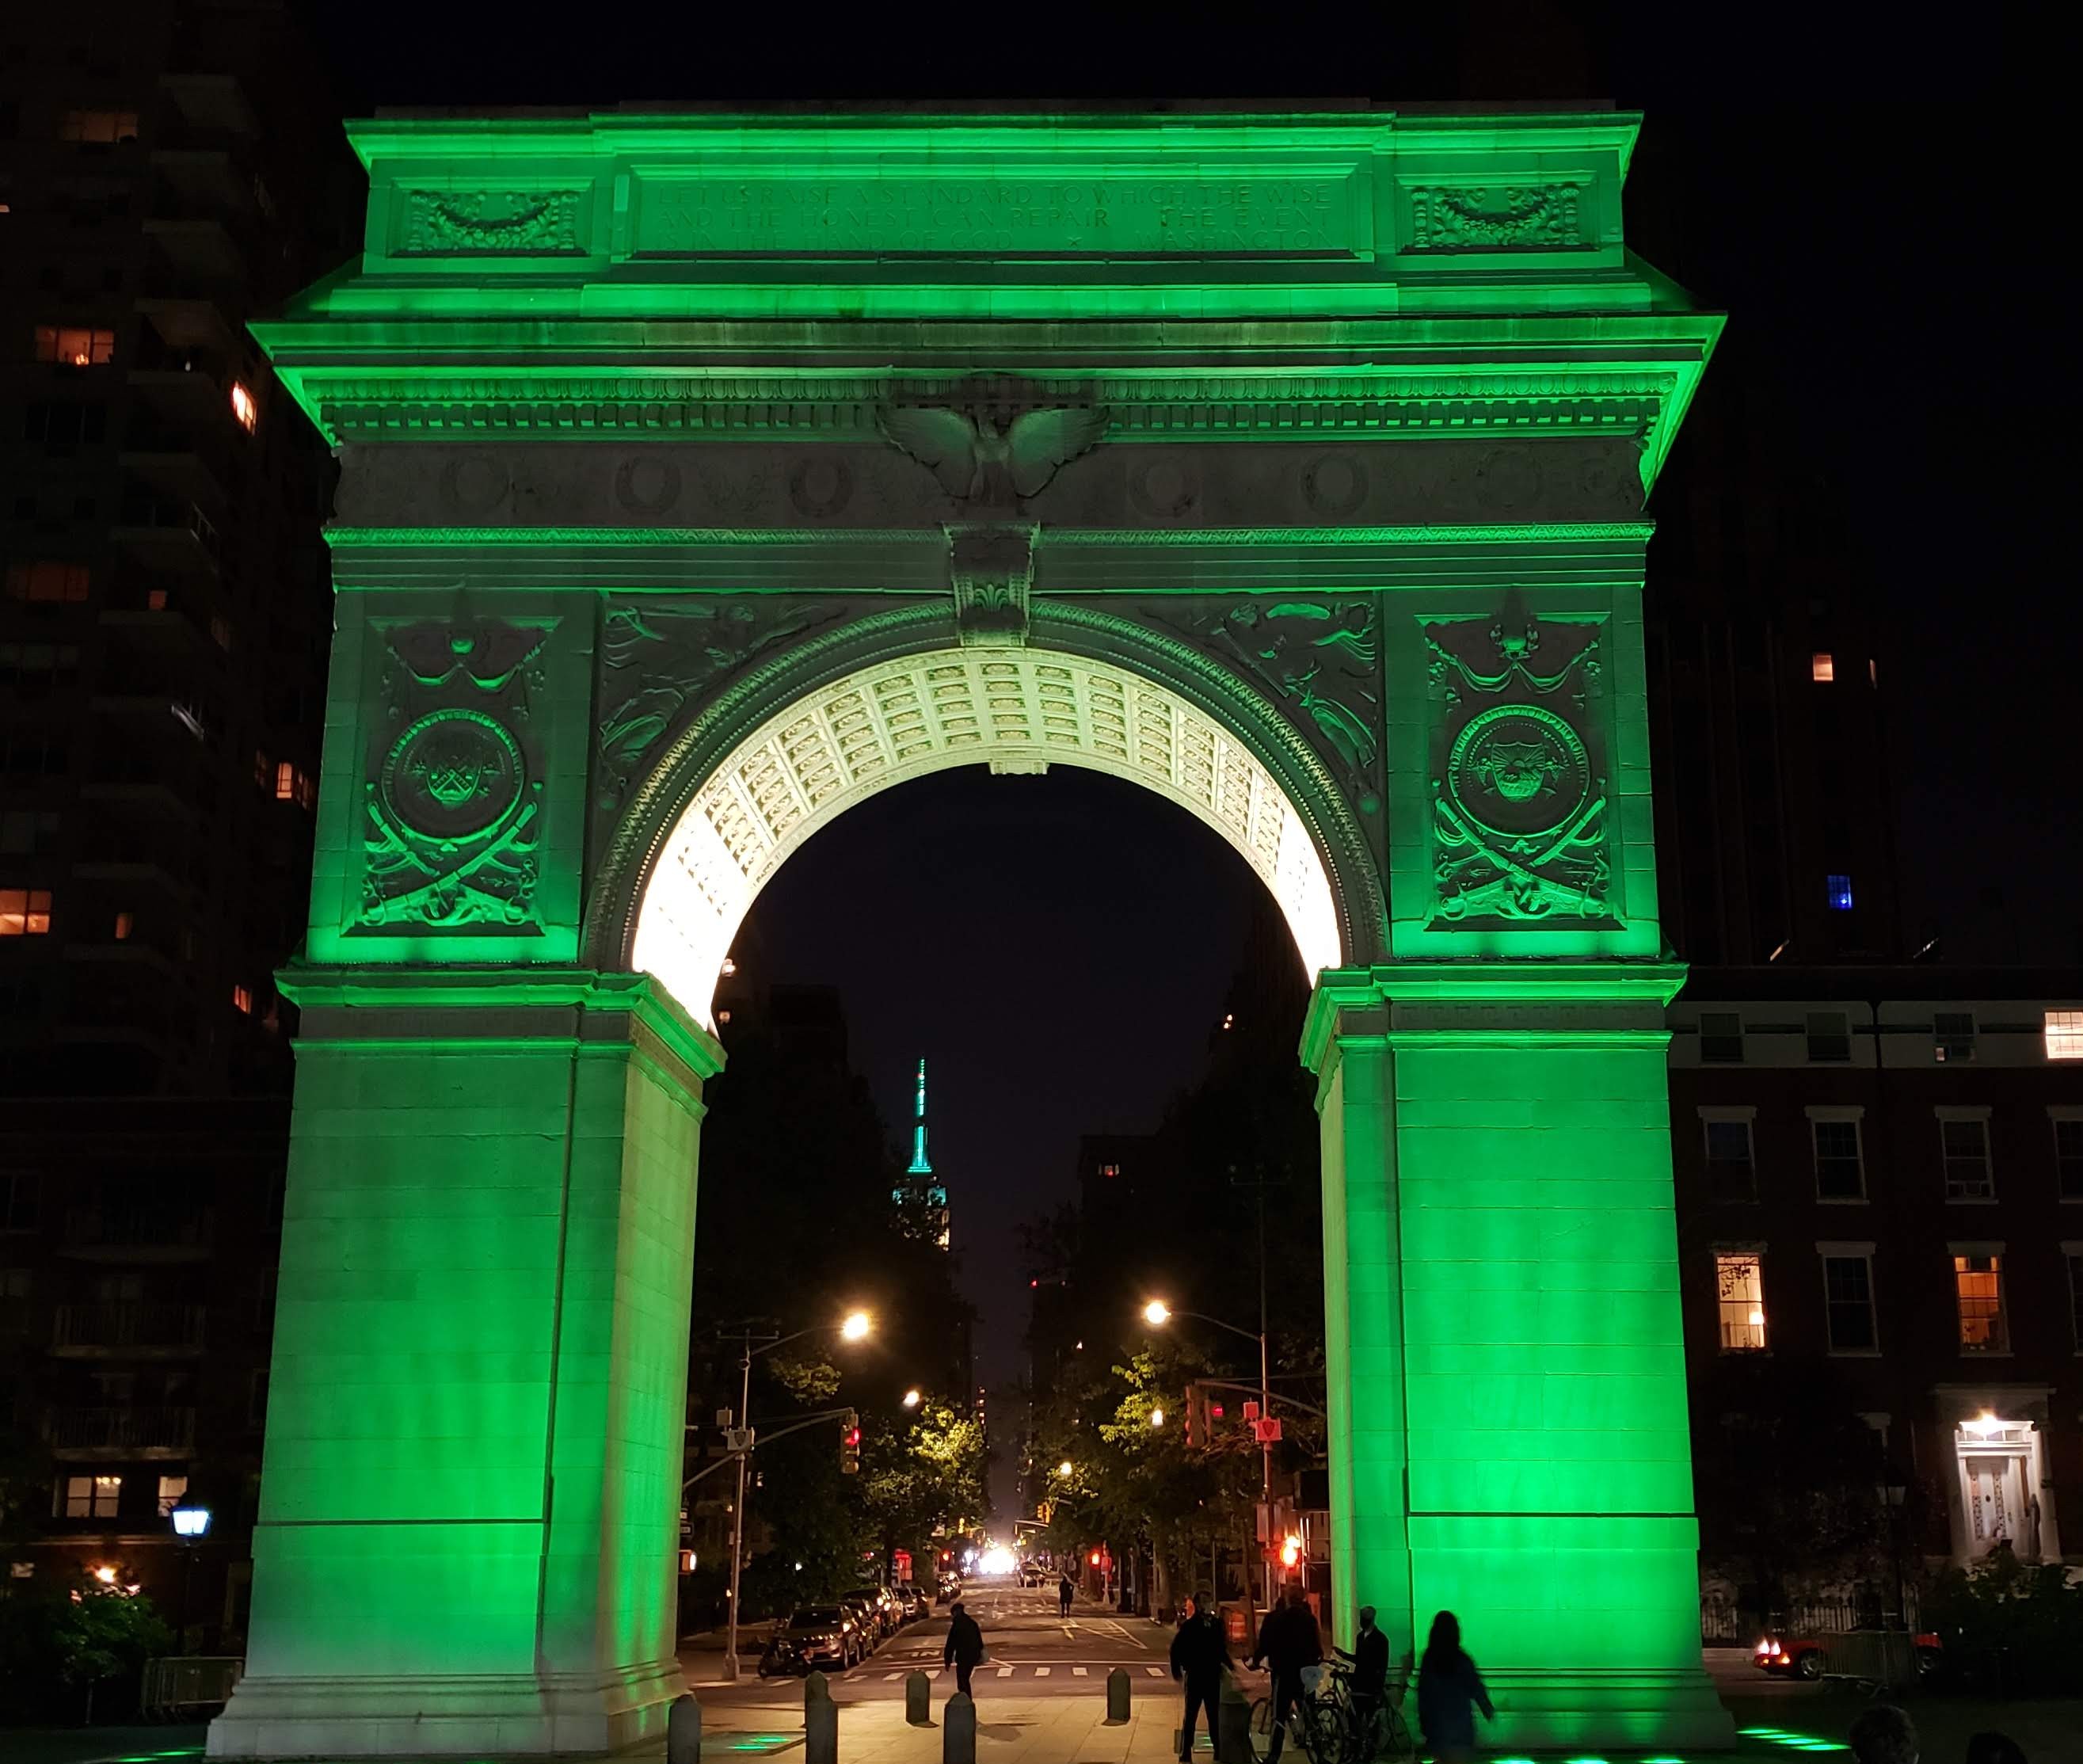 the arch at night illuminated with green lights